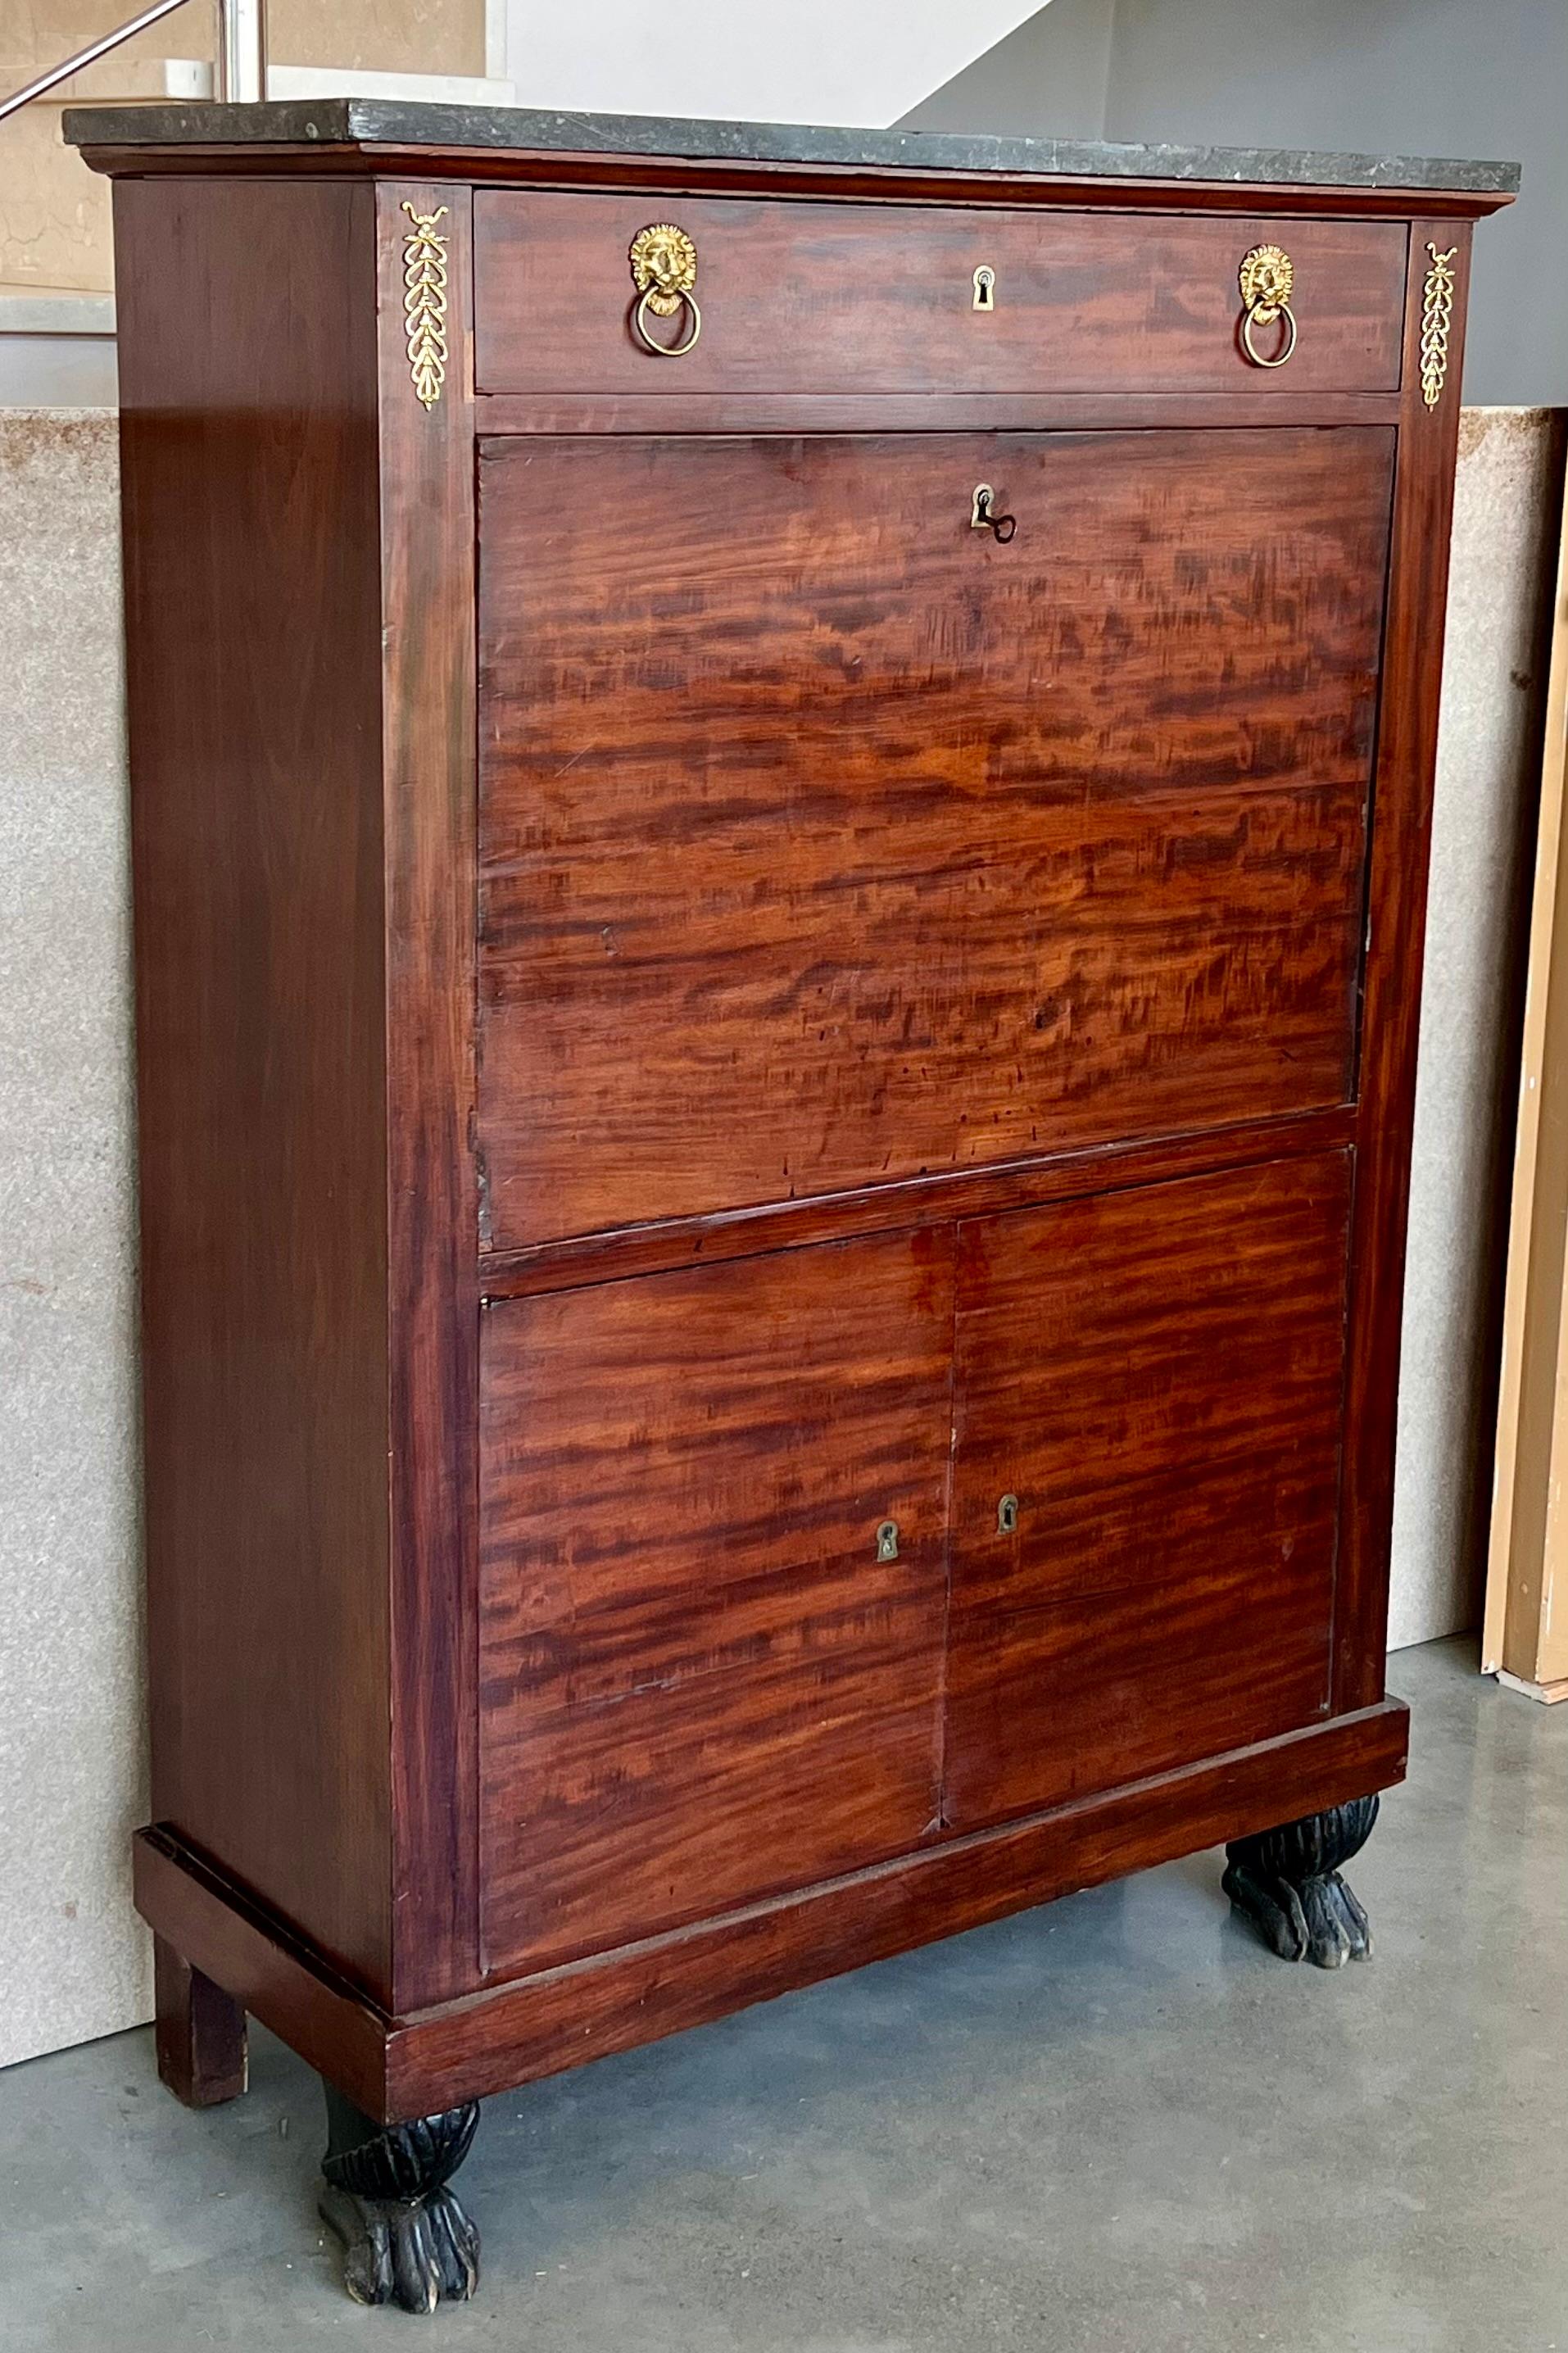 A dramatic Charles X fall front secretary in astounding burled mahogany veneer. The original fossilized marble top is supported by an elliptical molding. The main body contains one upper drawer and seven below the desk area. The secretary workspace